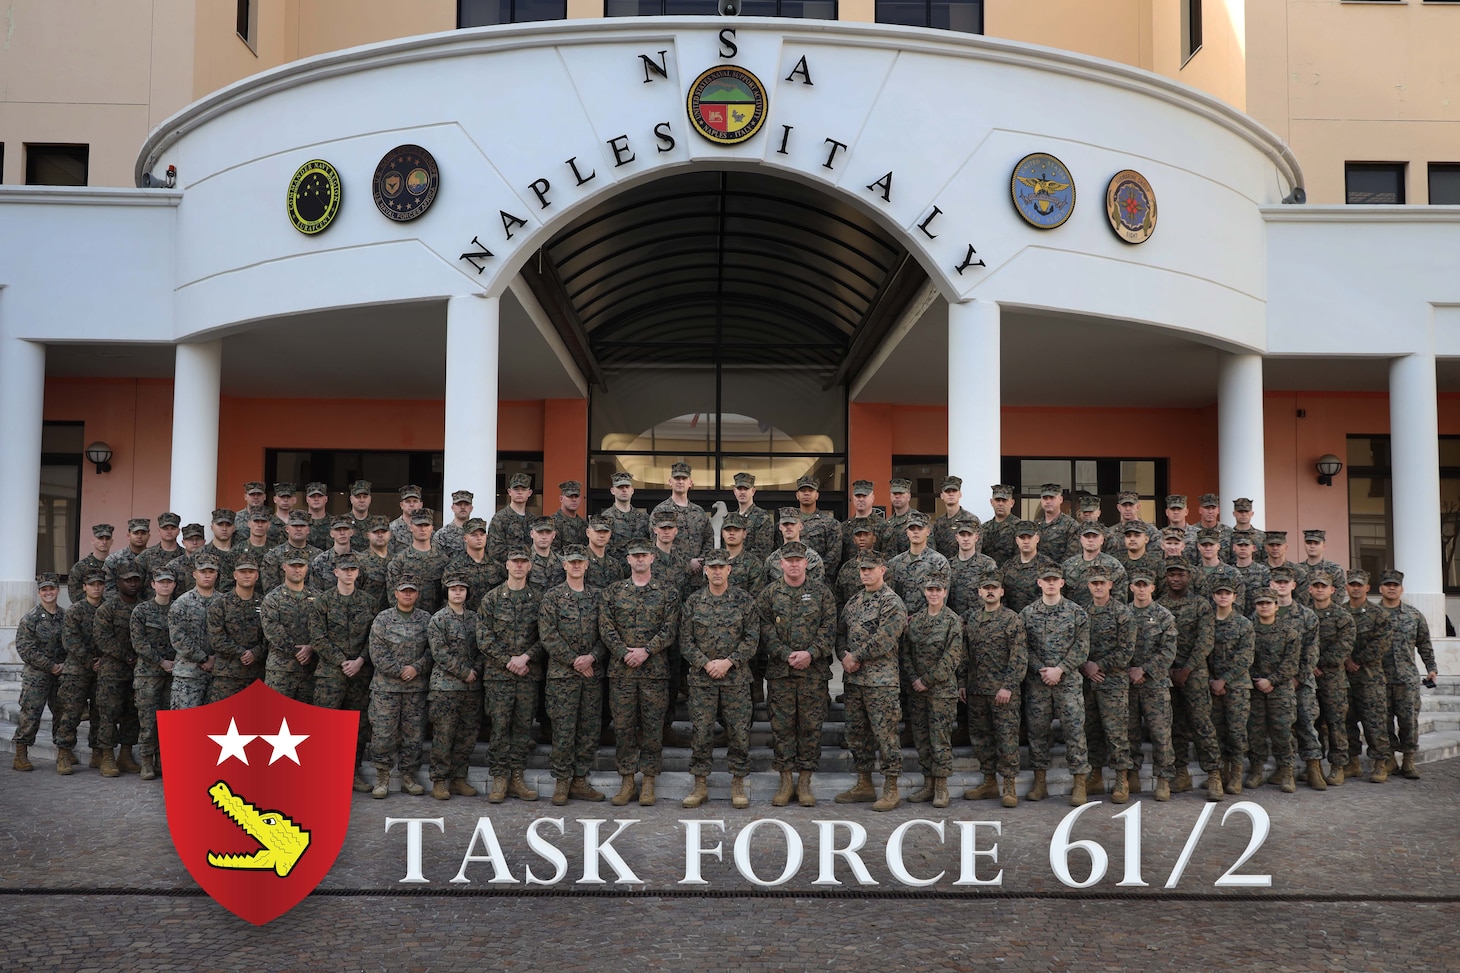 Commander Task Force Six (CTF 6) established a temporary Naval Amphibious Force, Task Force 61/2 (TF-61/2), in order to command and control amphibious and expeditionary capabilities on an experimental basis within the the U.S. European Command (EUCOM) and U.S. Africa Command’s (AFRICOM) area of operations (AOO) in order to protect U.S. interests, reassure Allies and Partners, and enable integrated deterrence of adversaries. TF 61/2 is led by the Commander, 2d Marine Division, II Marine Expeditionary Force (MEF), Major General Francis Donovan. Forces assigned to TF 61/2 include an Amphibious Ready Group (ARG)/Marine Expeditionary Unit (MEU) and a Reconassaince/Counter-Reconassisance Force composed of 2d Marine Division elements.